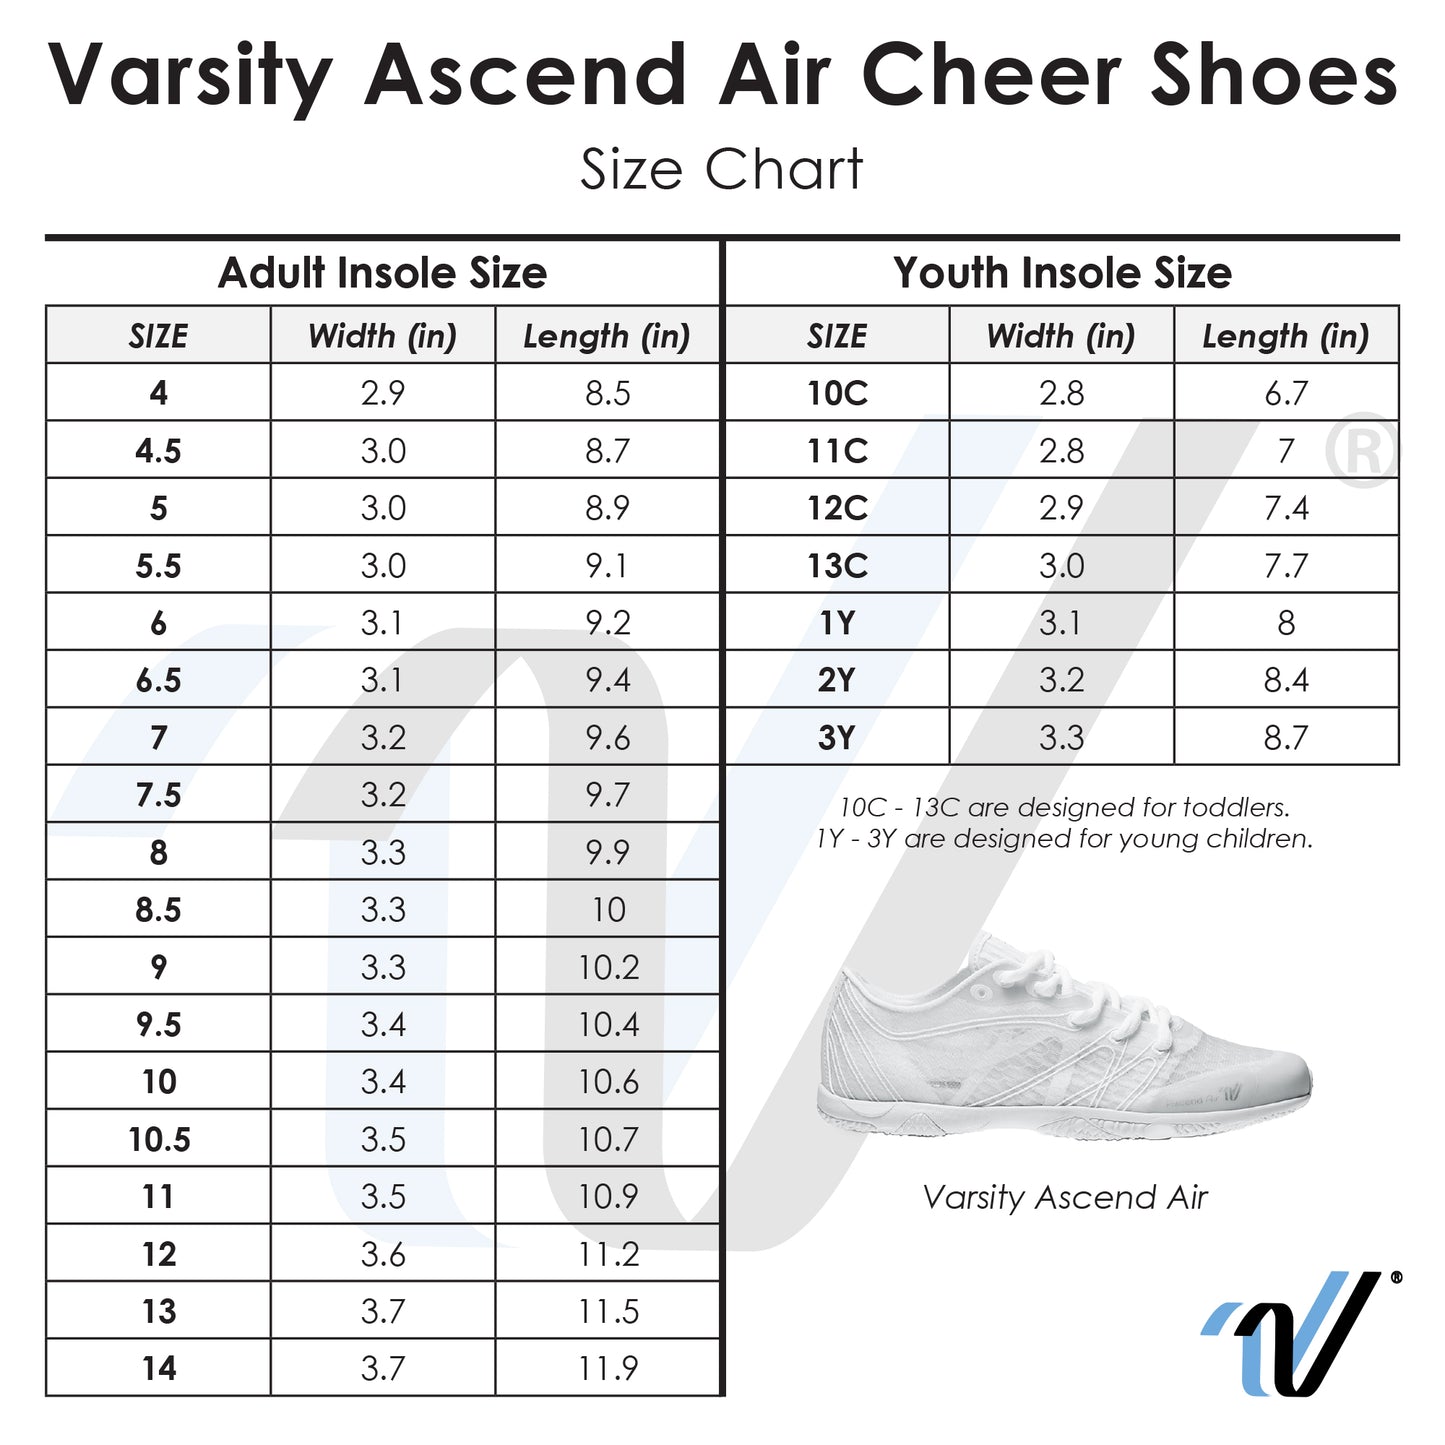 Varsity Ascend Air Cheer Shoes